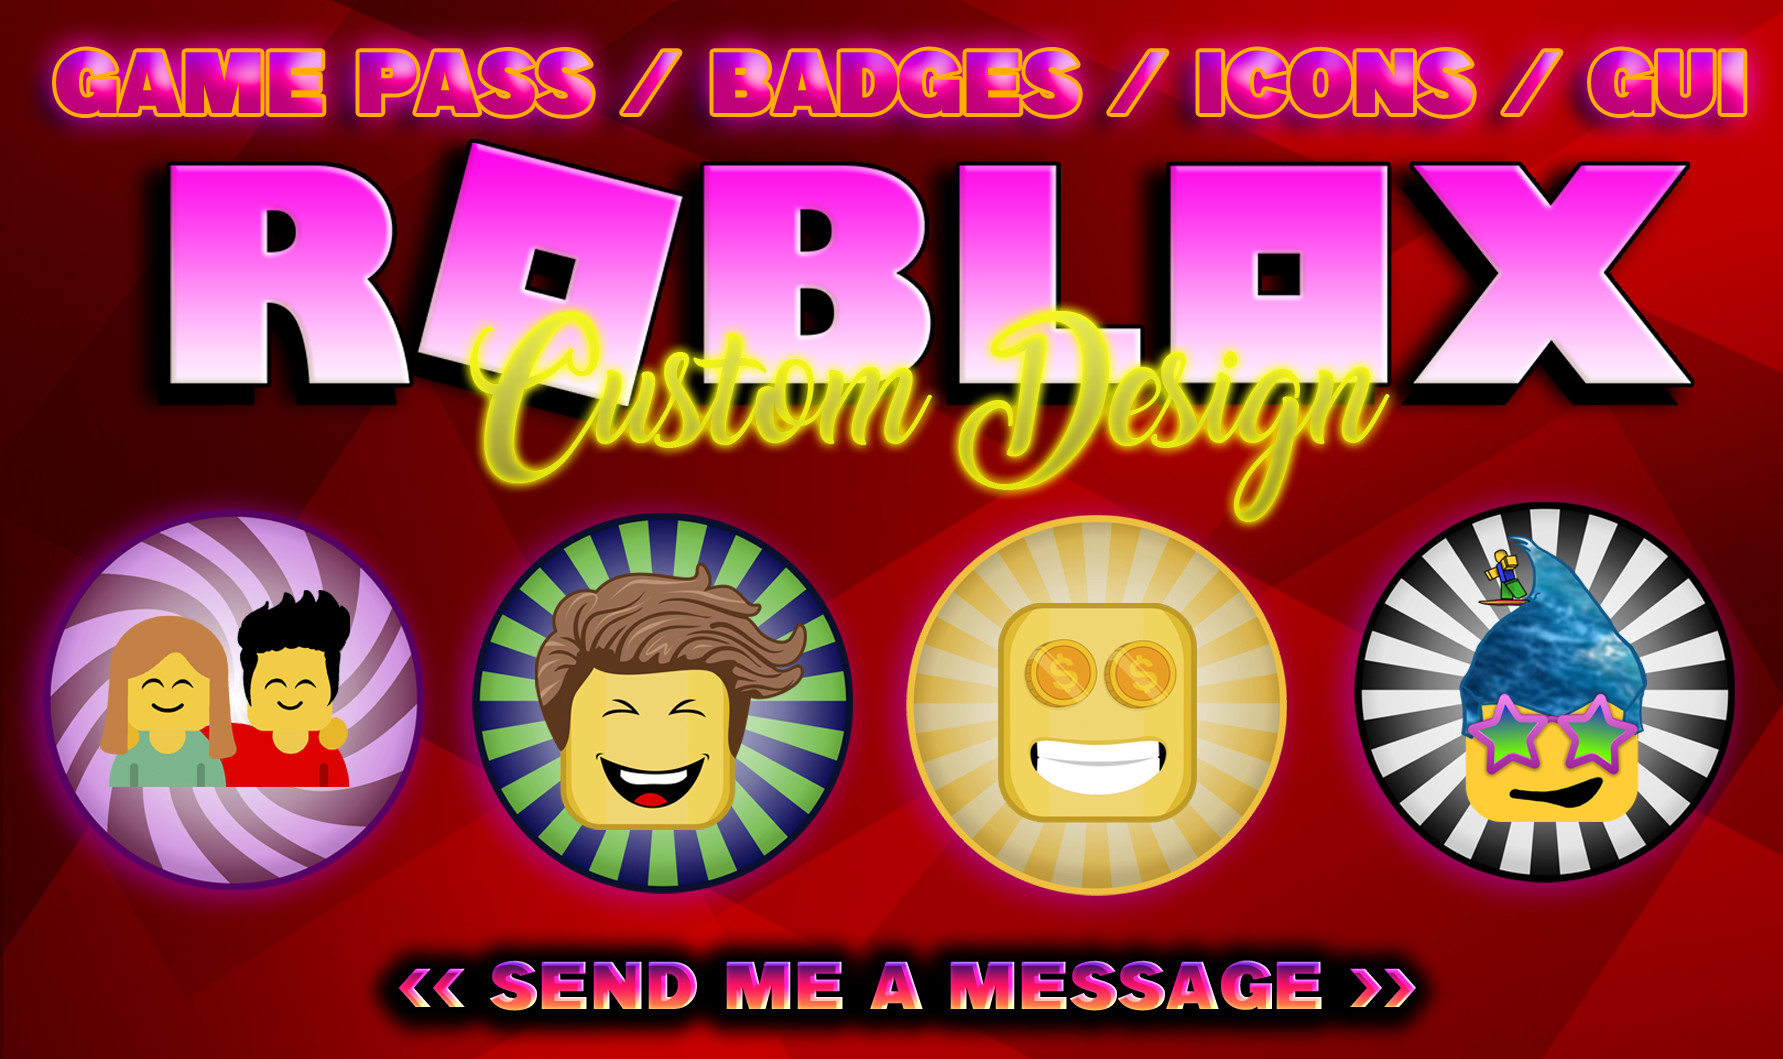 Blox_designs: I will create roblox gamepass and badge icons for your roblox  game for $10 on fiverr.com